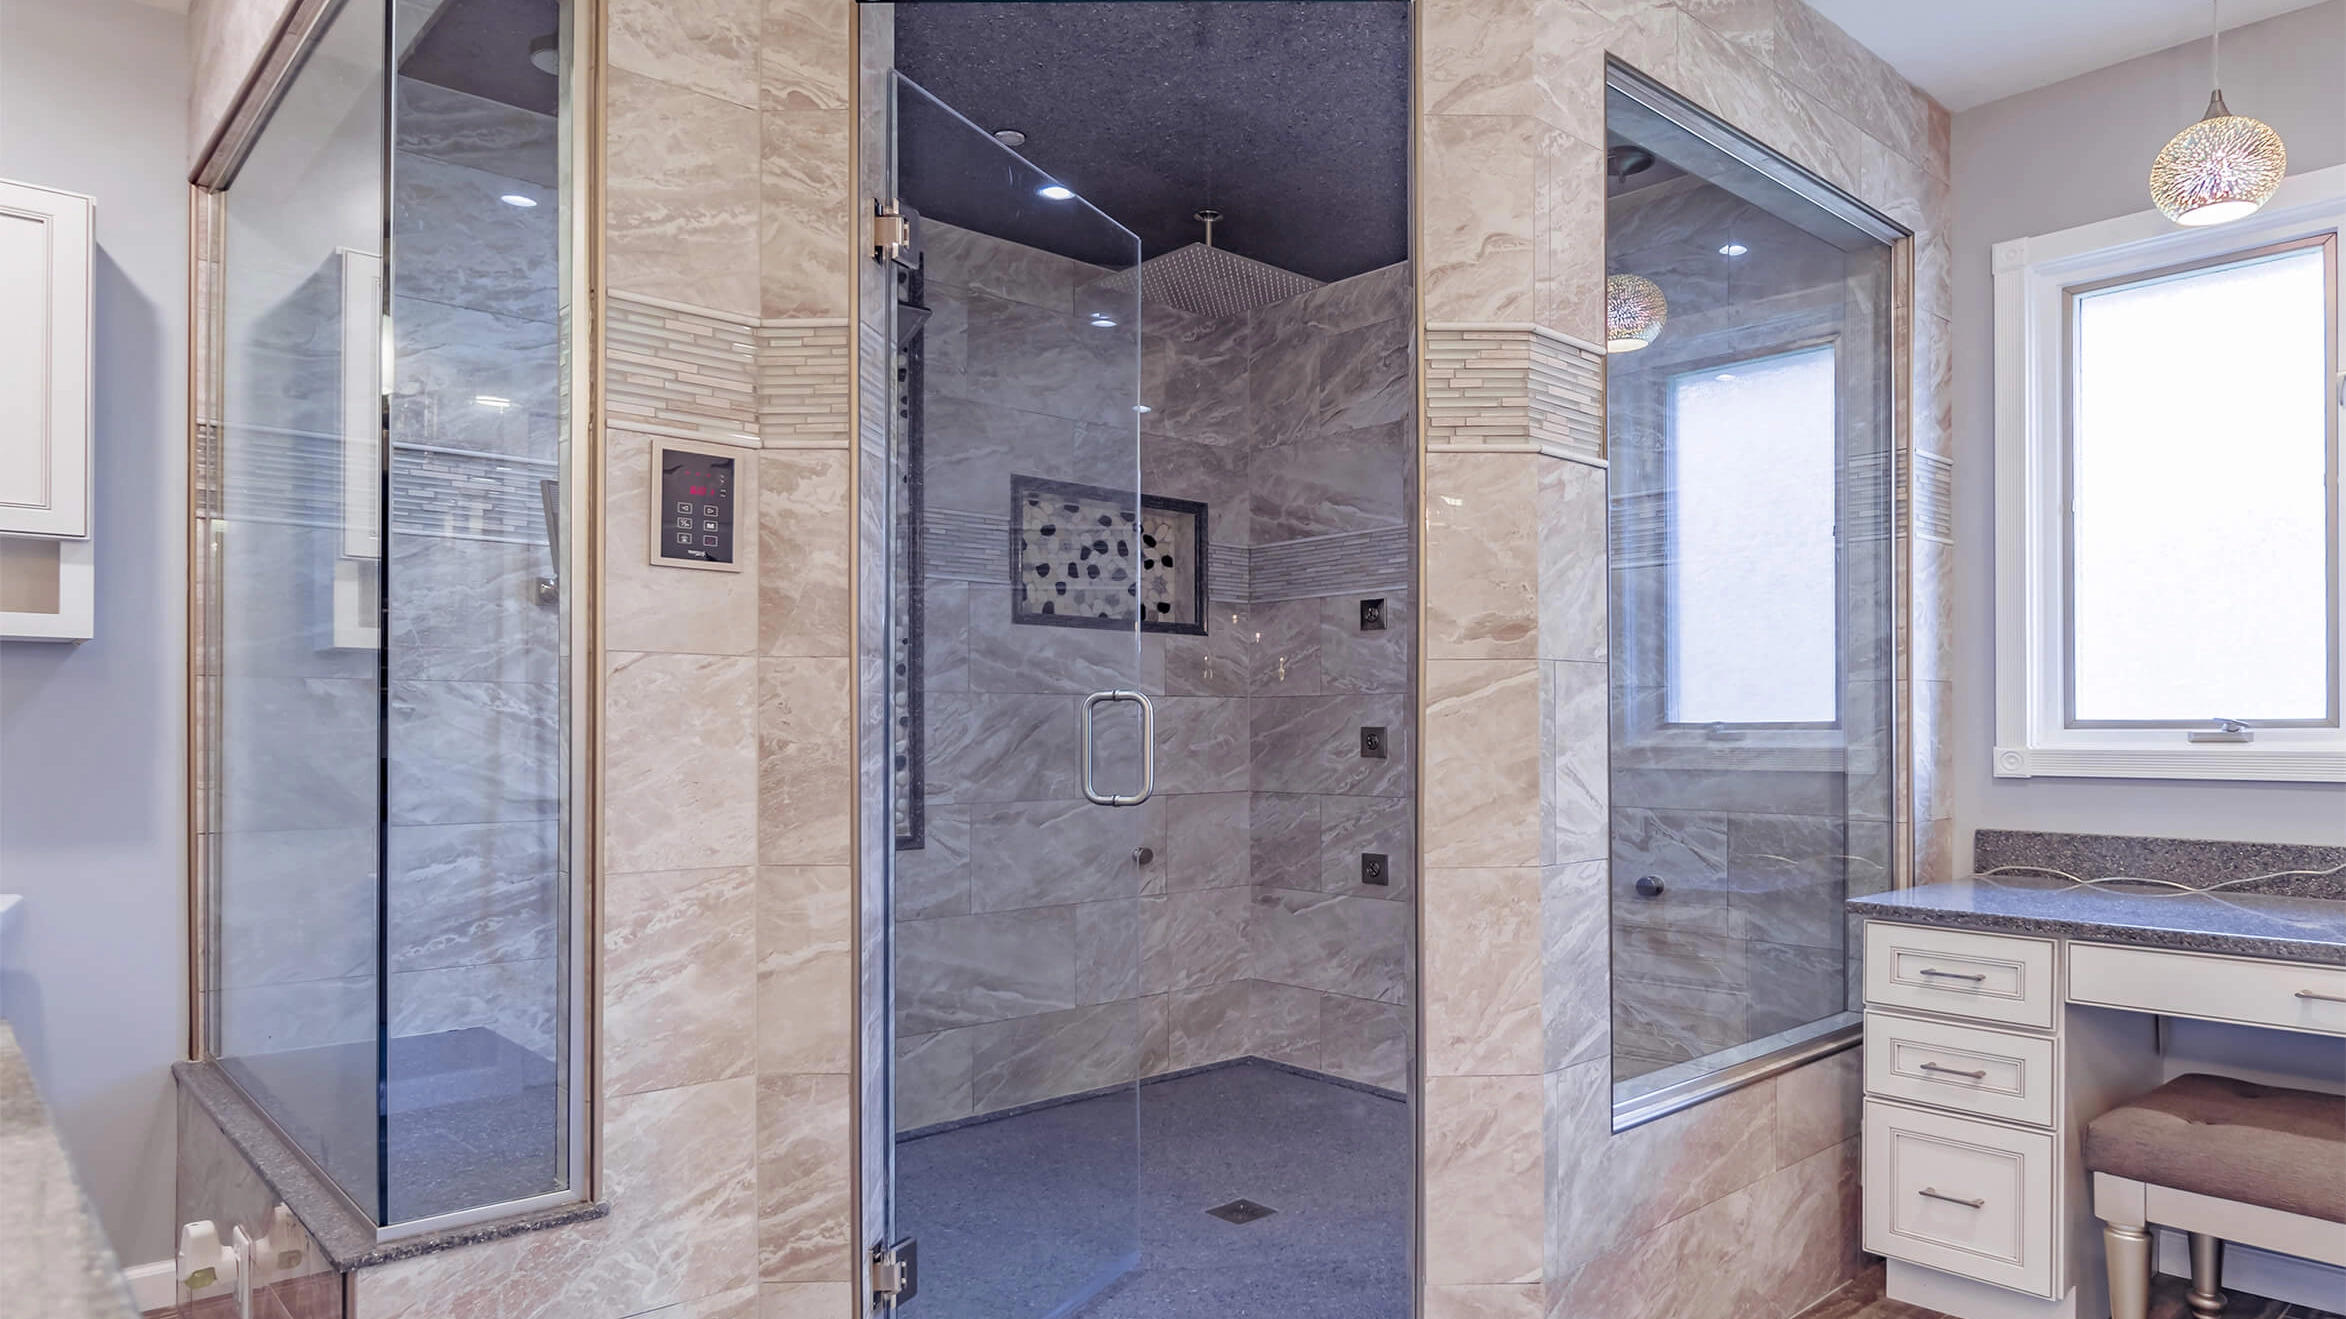 Modern onyx shower with glass doors in a luxurious bathroom.